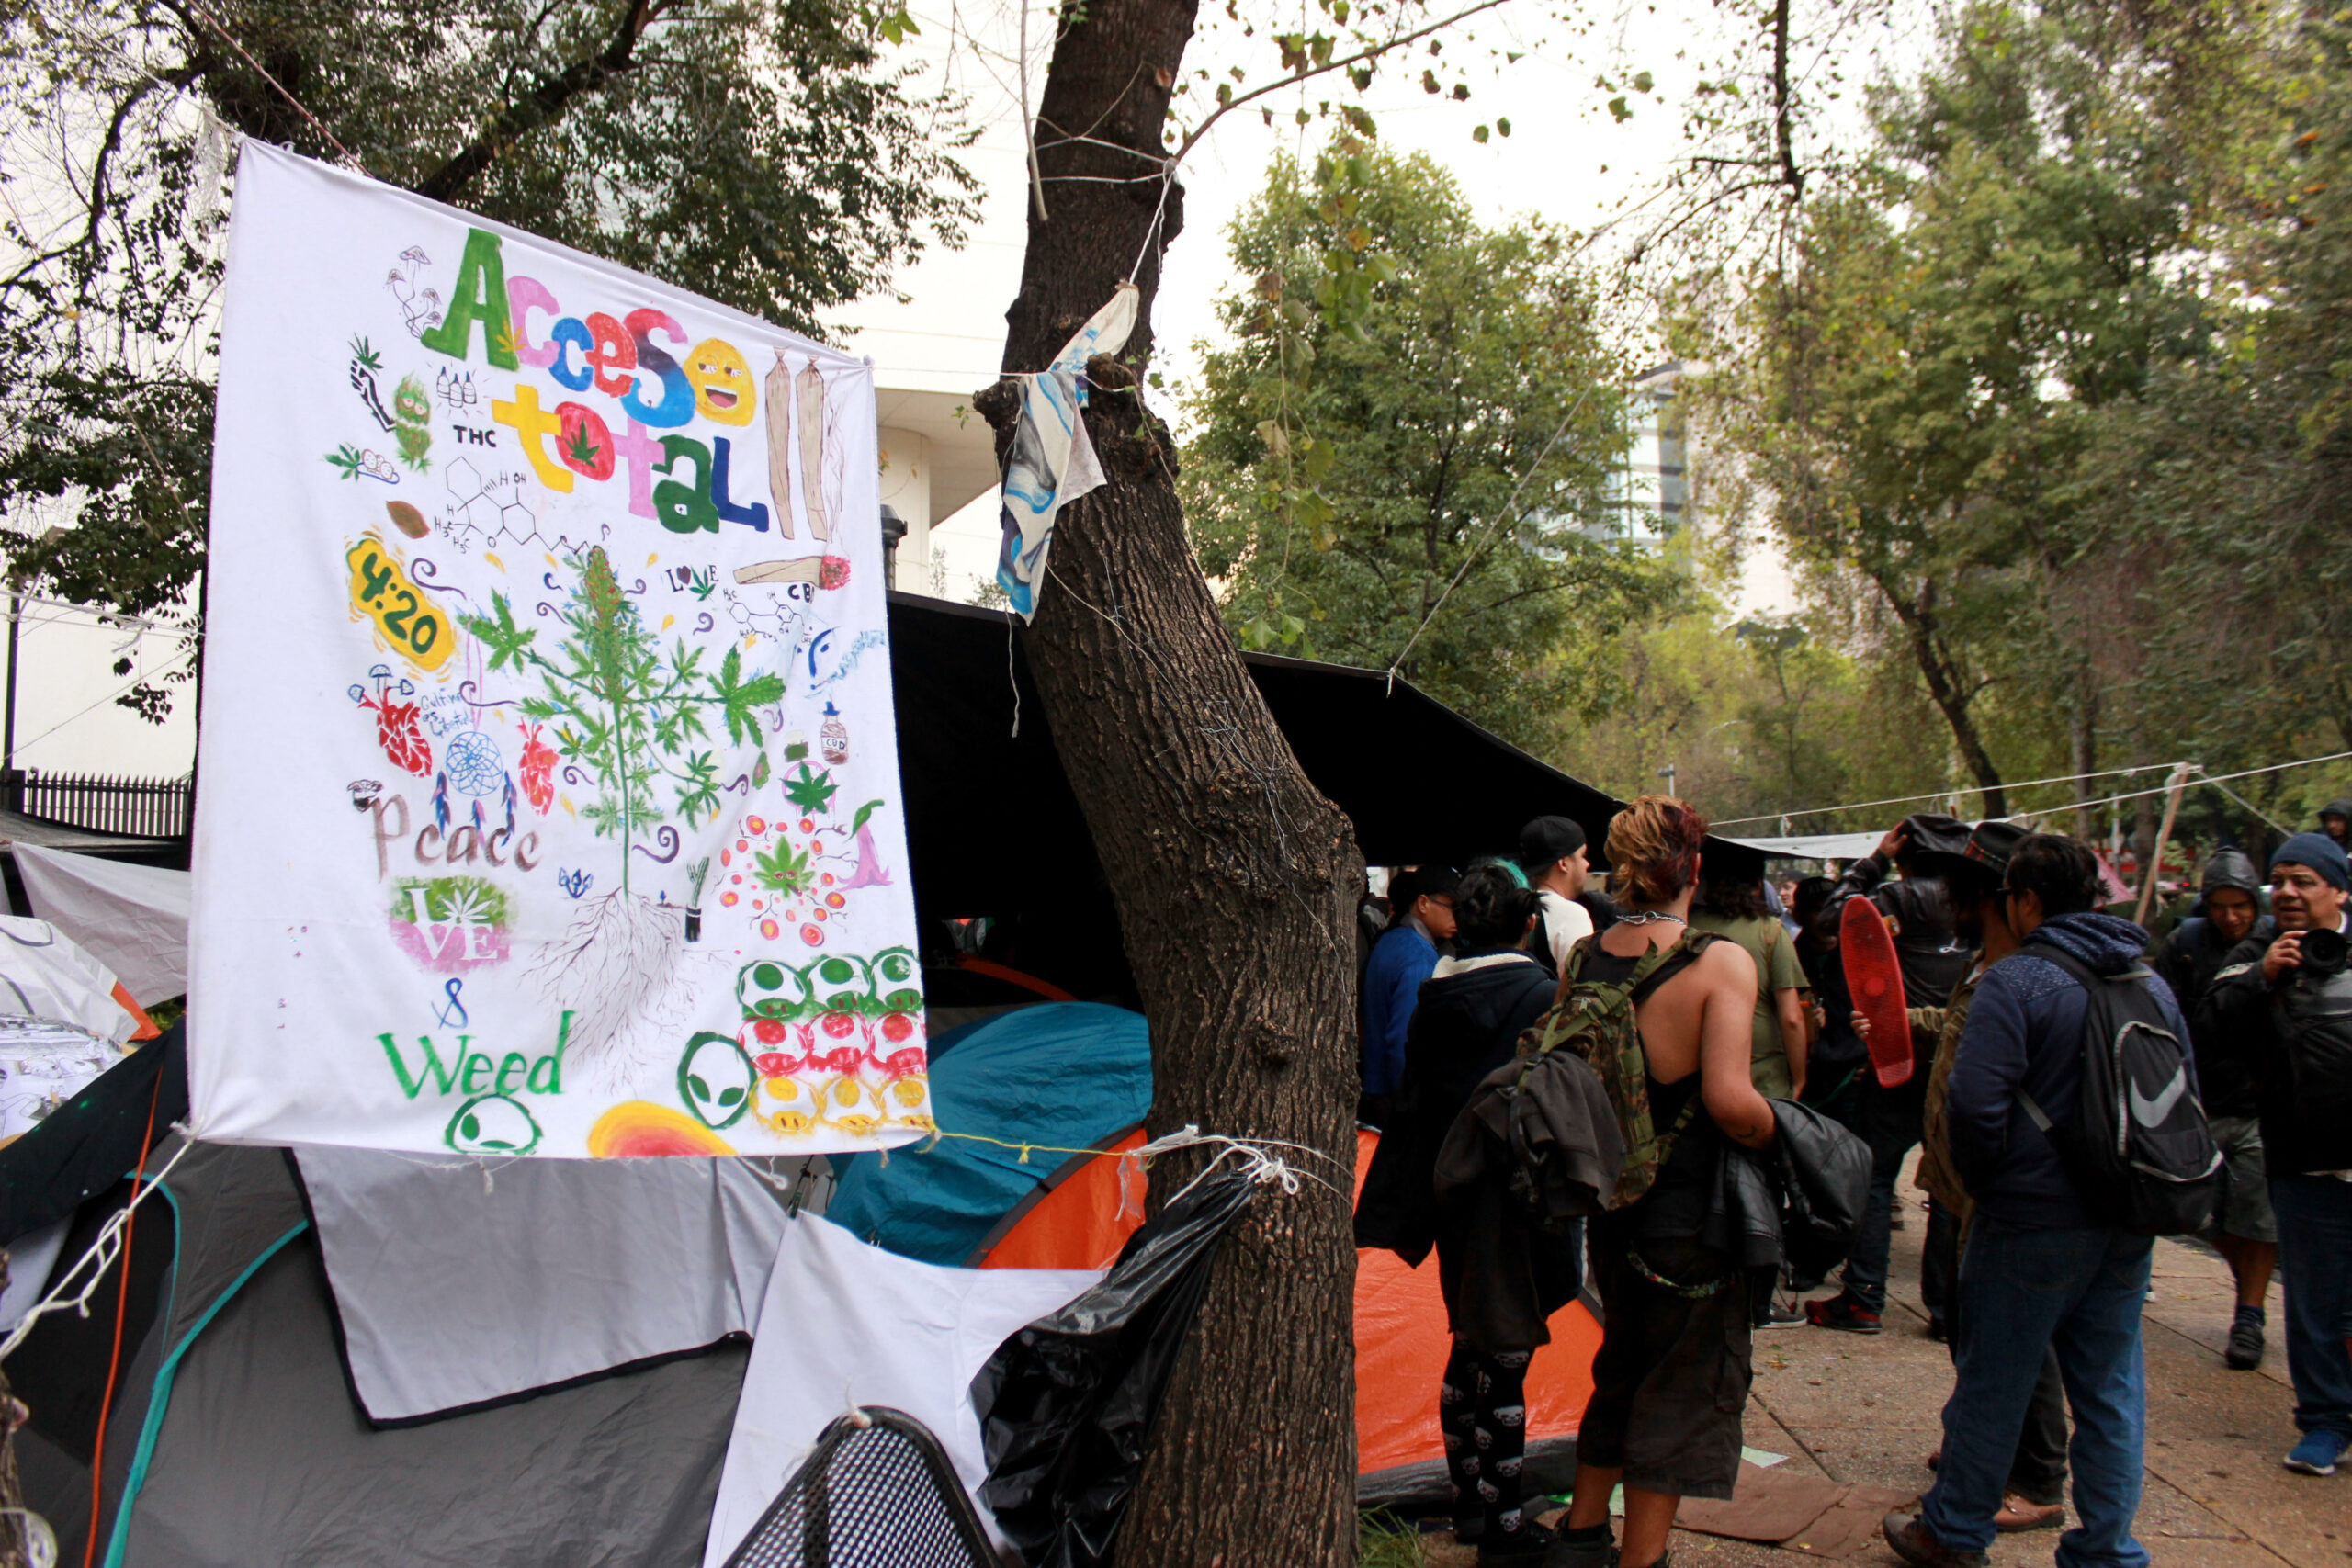 420-Friendly Cannabis Legalization Protest Zones Are Popping Up All Over Mexico Right Now